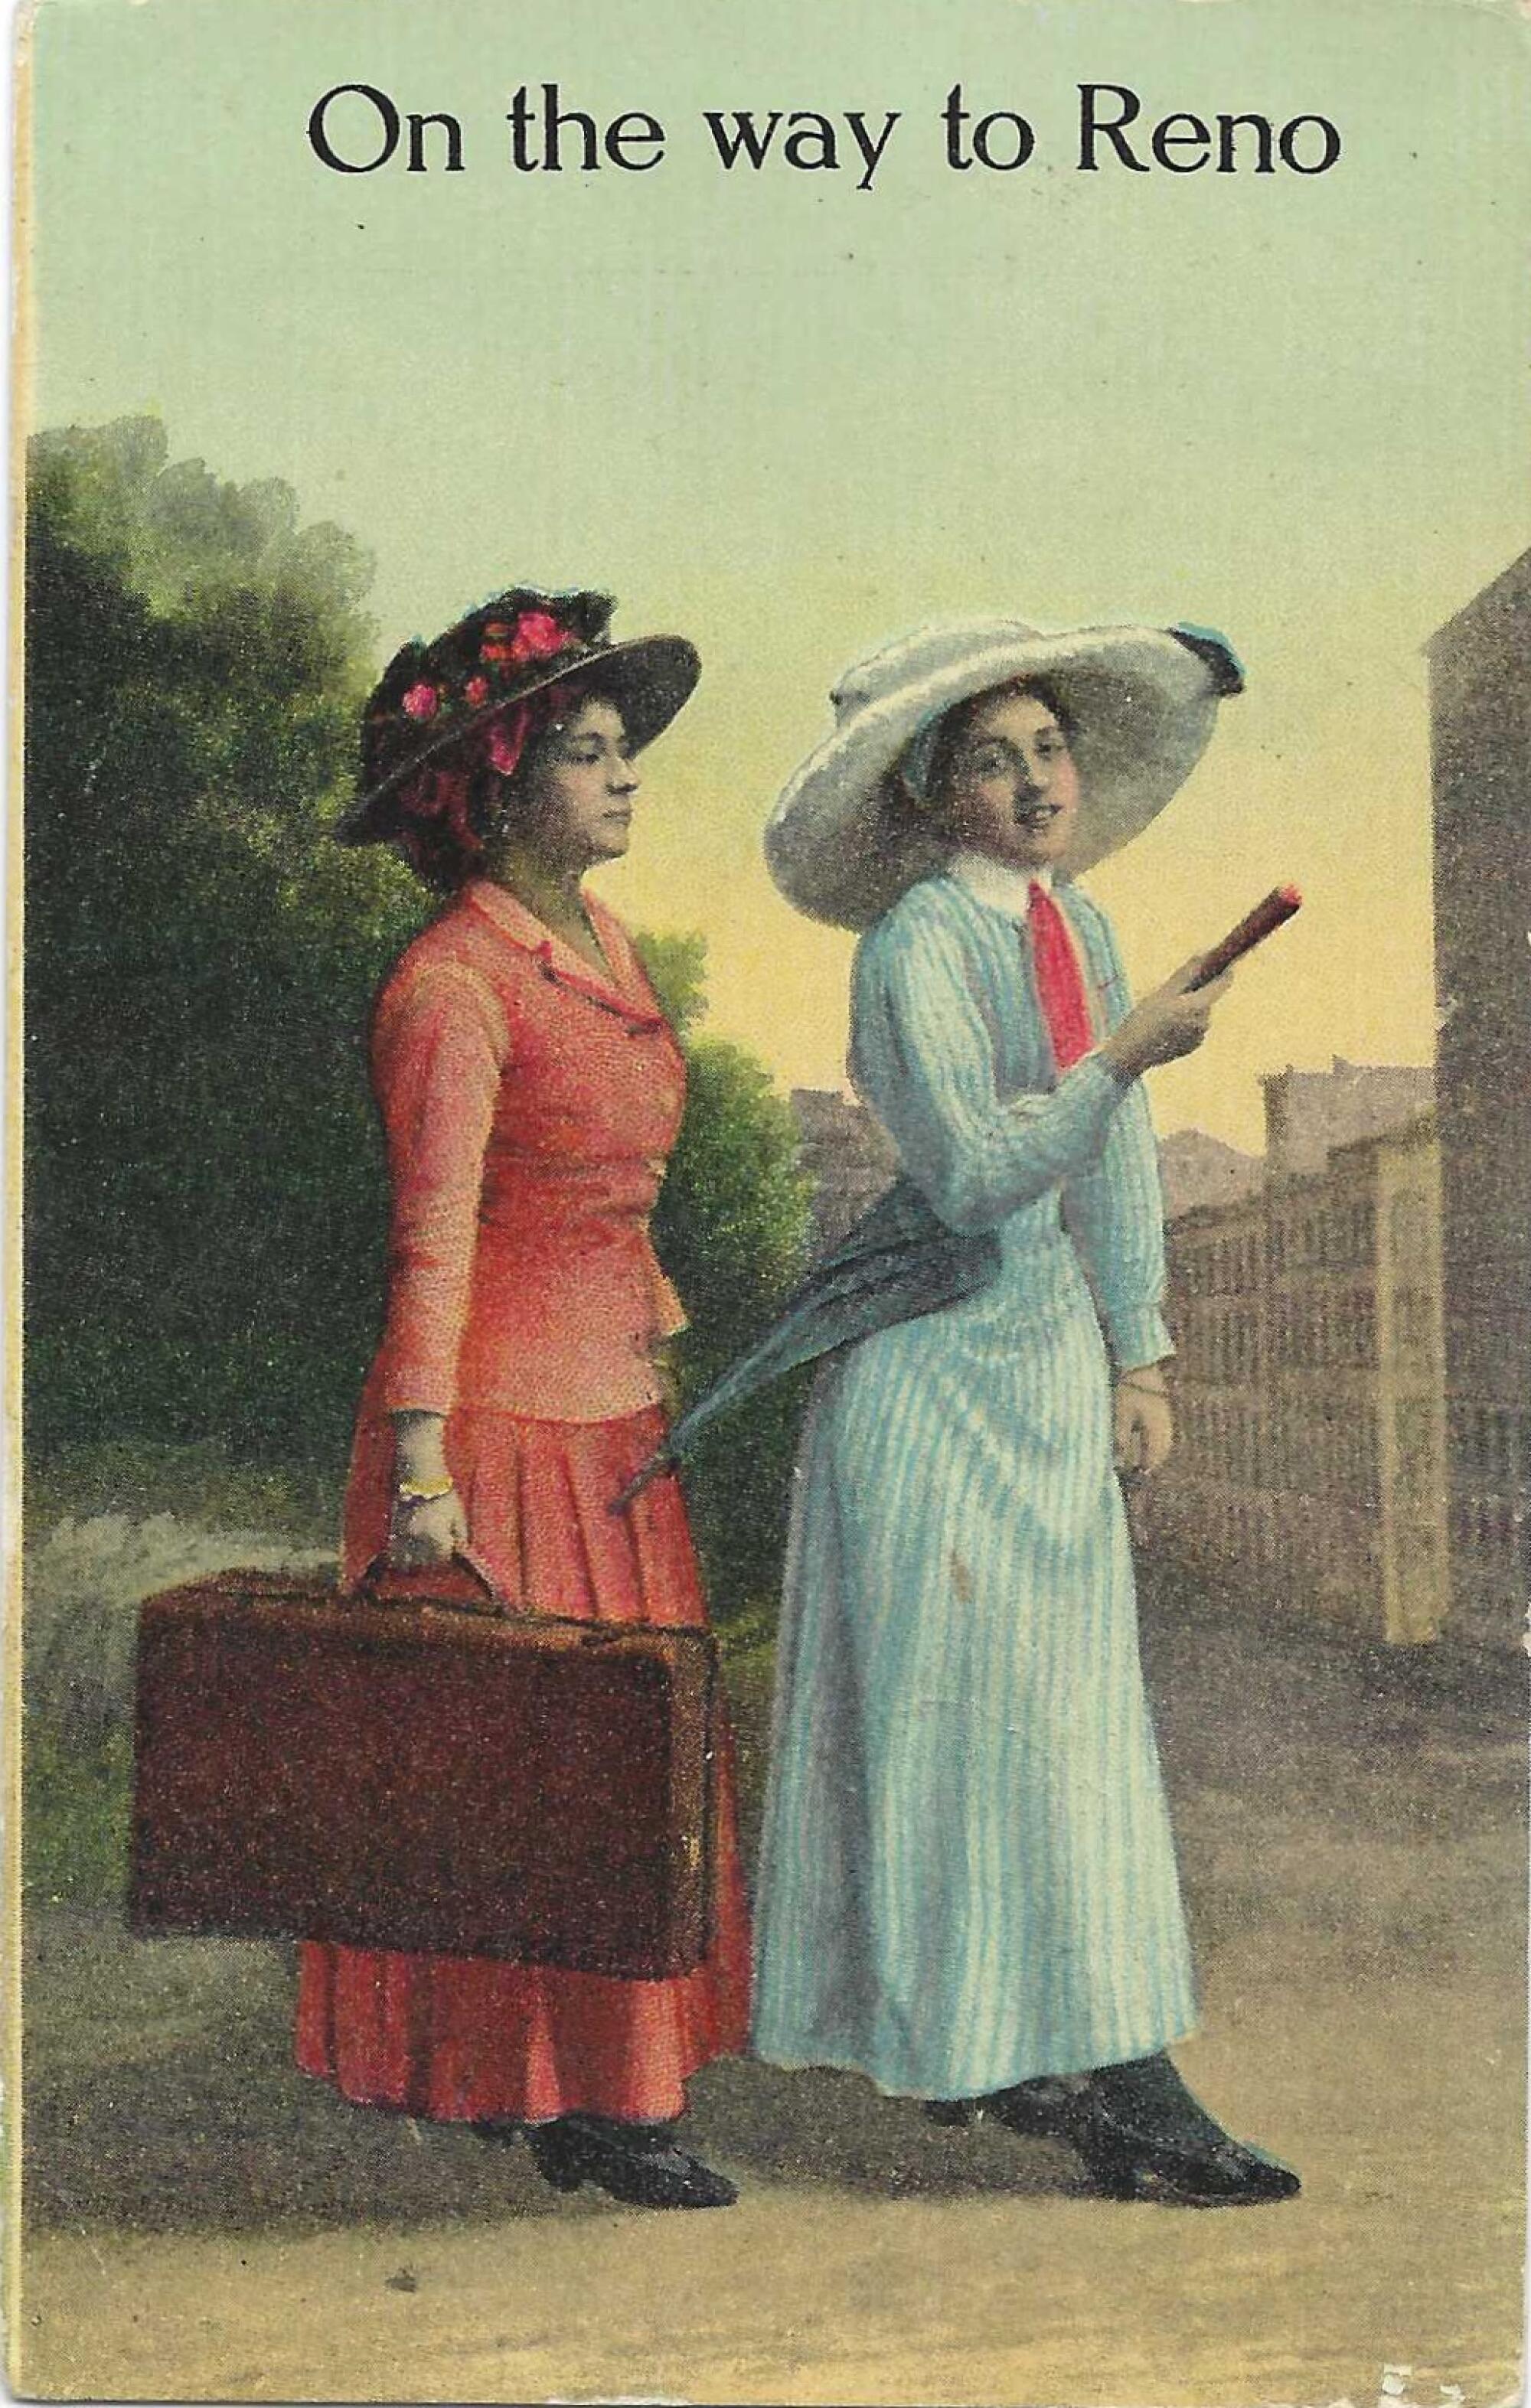 Two women, one in red and one in blue, appear ready to leave town. Text: "On the way to Reno"